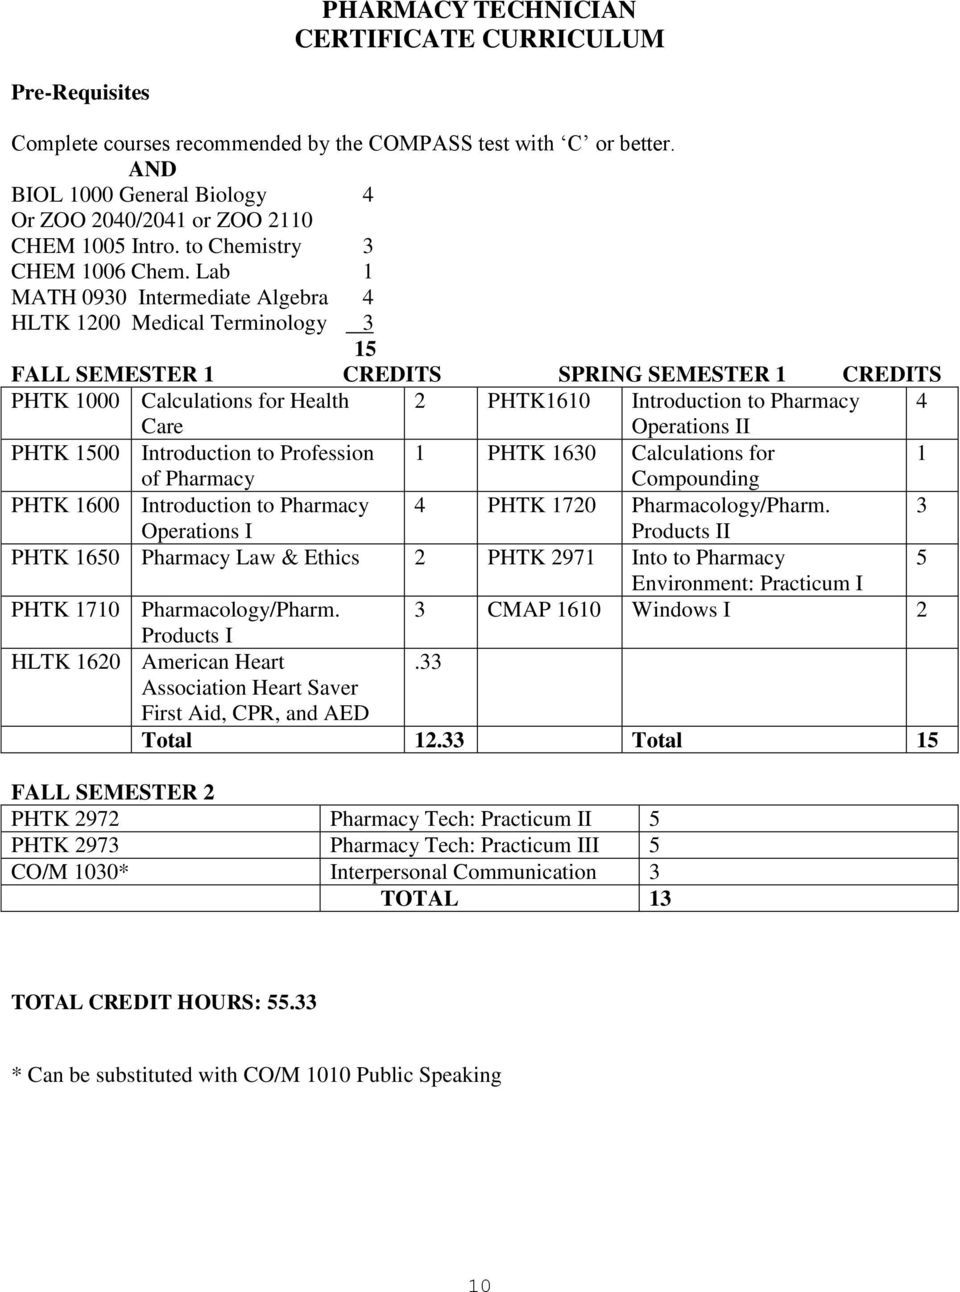 Lab 1 MATH 0930 Intermediate Algebra 4 HLTK 1200 Medical Terminology 3 15 FALL SEMESTER 1 CREDITS SPRING SEMESTER 1 CREDITS PHTK 1000 Calculations for Health 2 PHTK1610 Introduction to Pharmacy 4